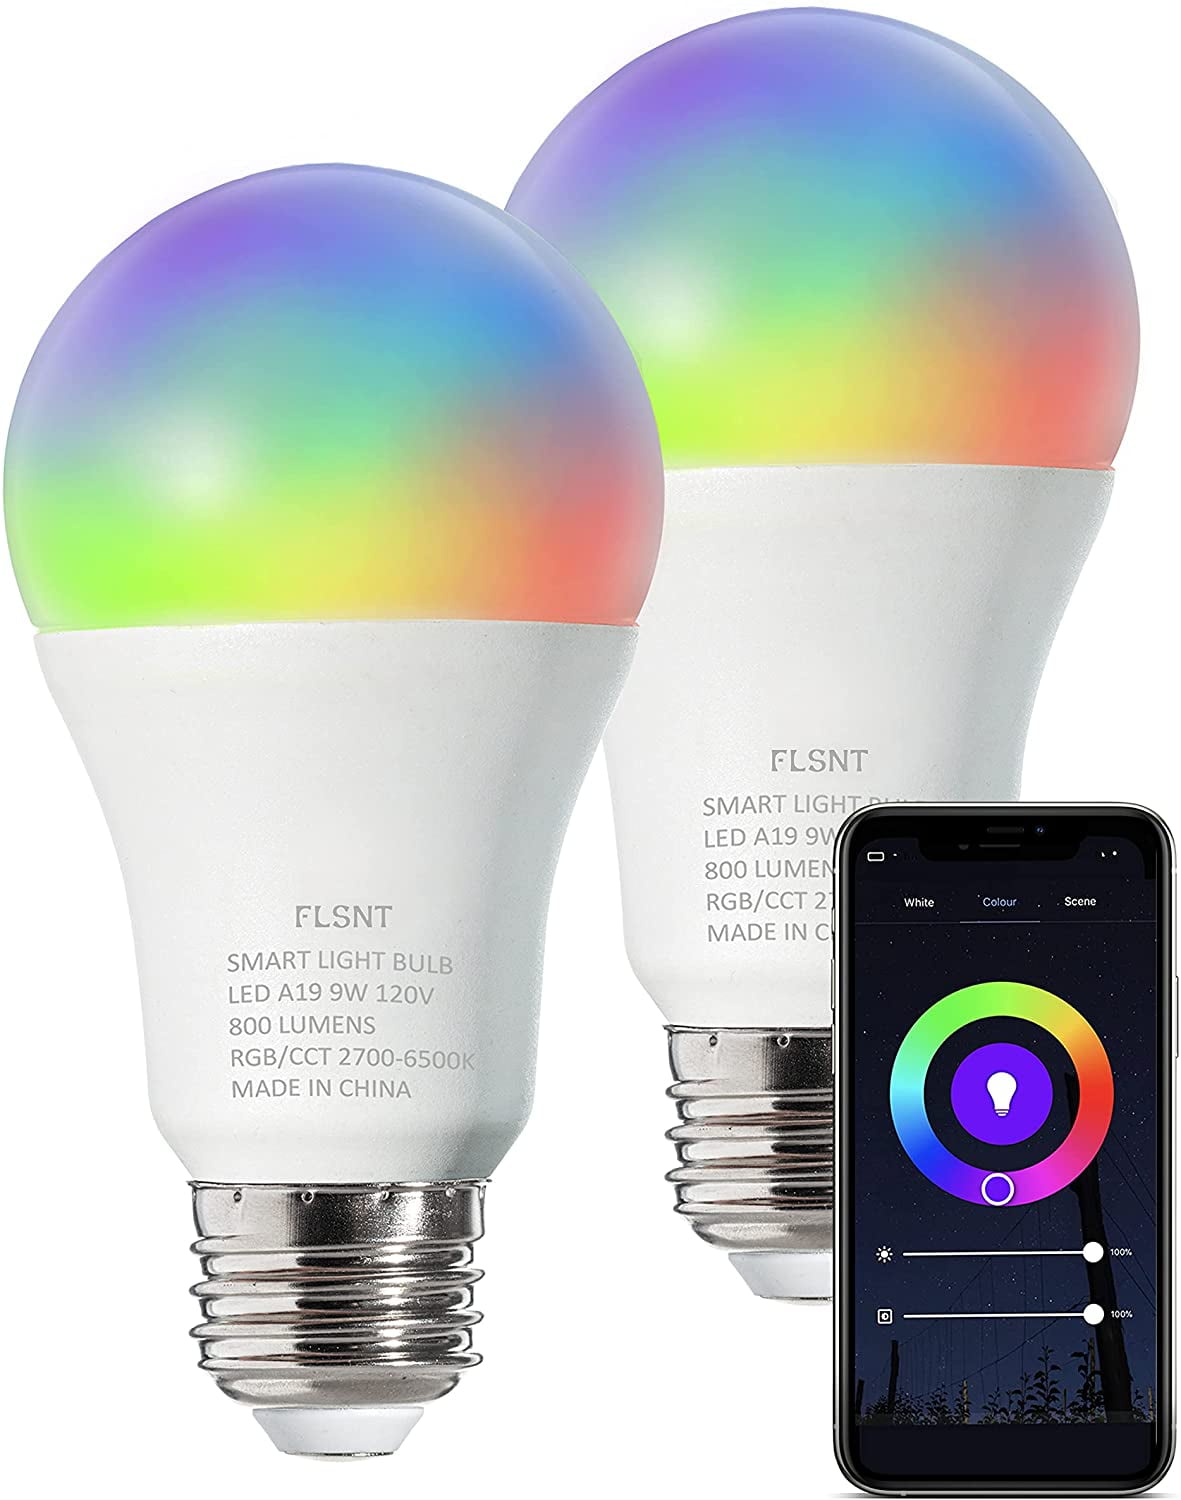 LED RGBW Colors Changing E27 7W Work with Alexa/Google Assistant Remotely Control 1 Pack No Hub Required Dimmable Timing Function USHAWN Smart WiFi Light Bulb 